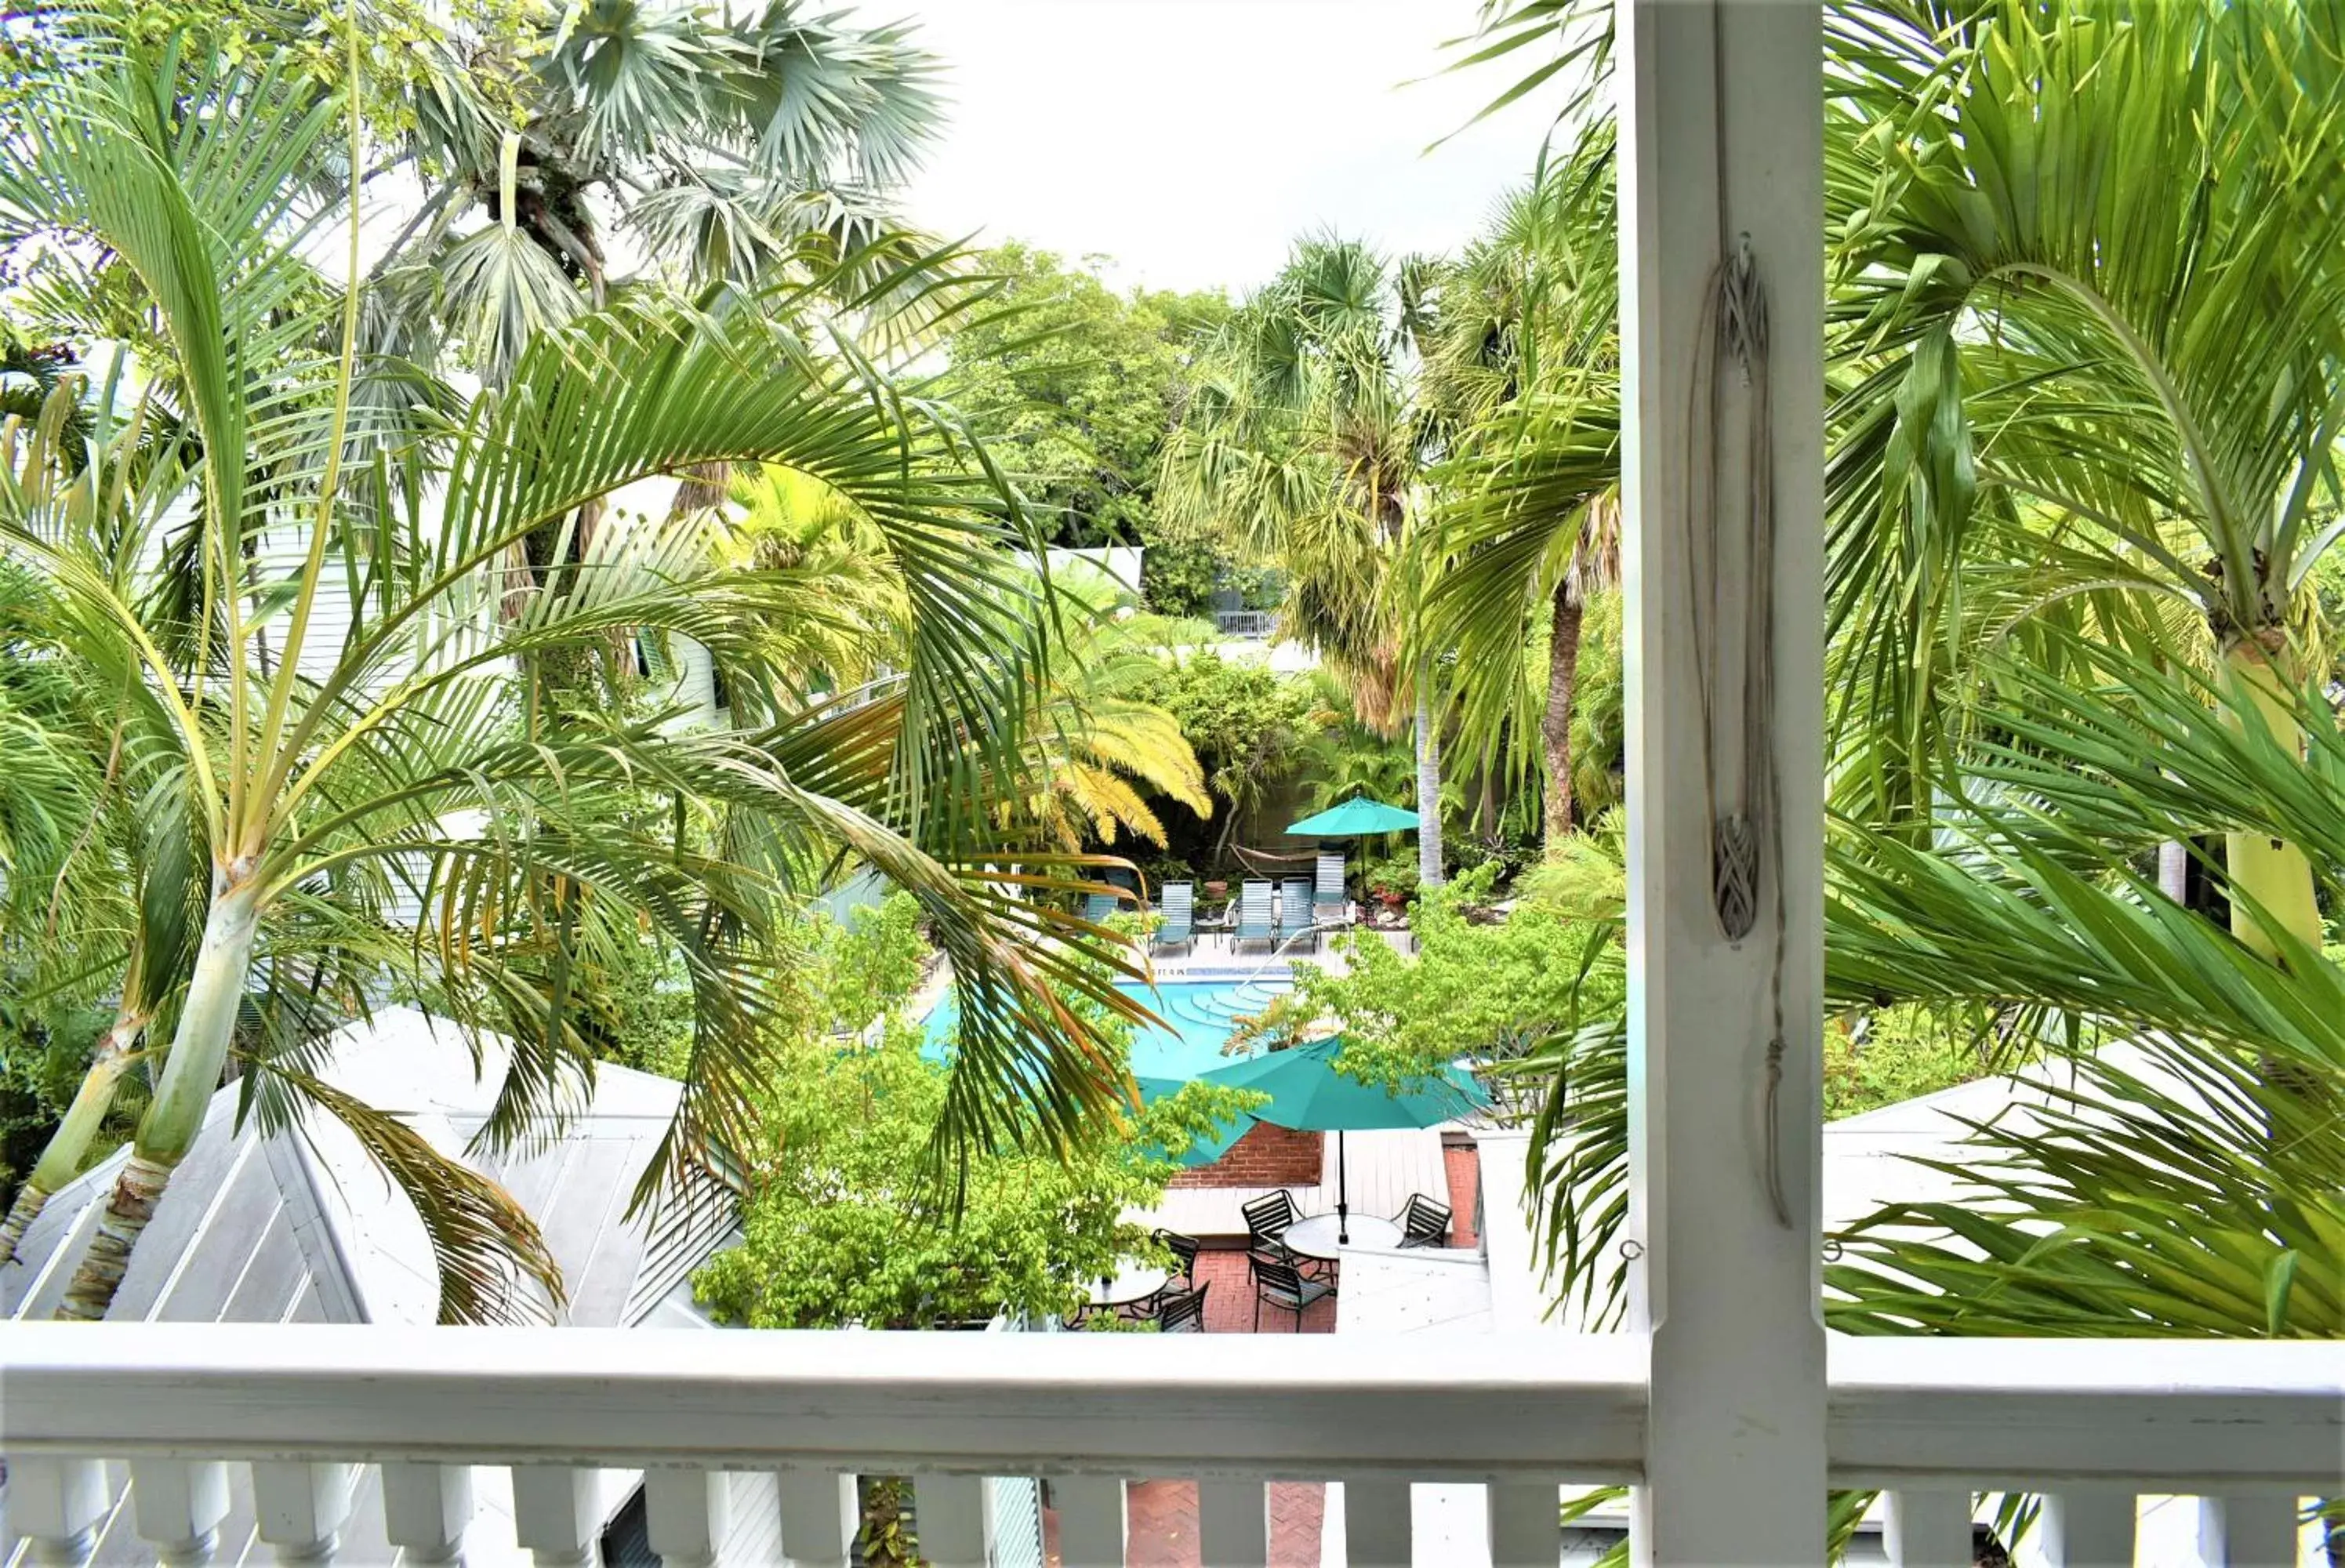 Pool View in Simonton Court Historic Inn & Cottages